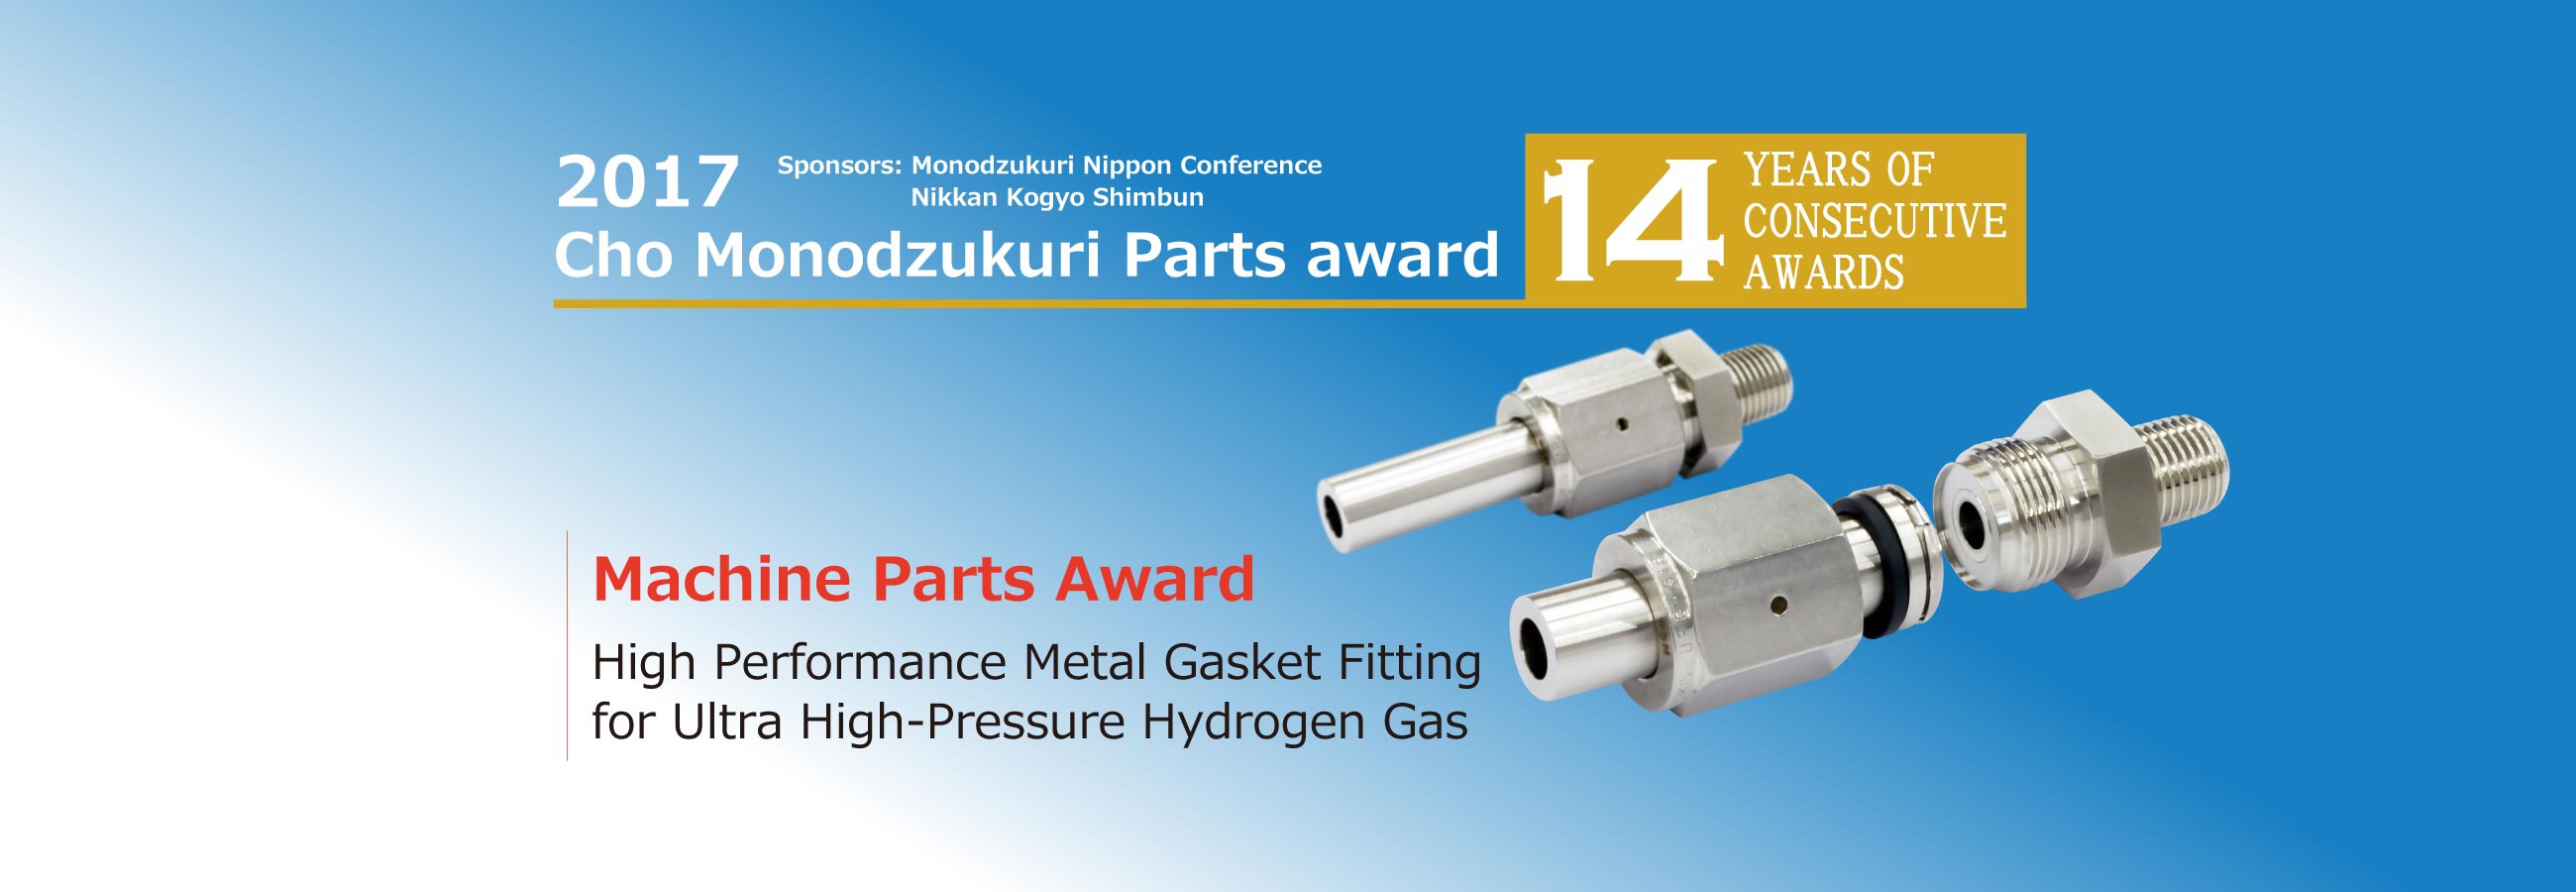 2017 Cho Monodzukuri Grand Award for Parts, 14 consecutive years of awards, Machinery Award, Metal Gasket Fittings for Ultra High-Pressure Hydrogen Gas